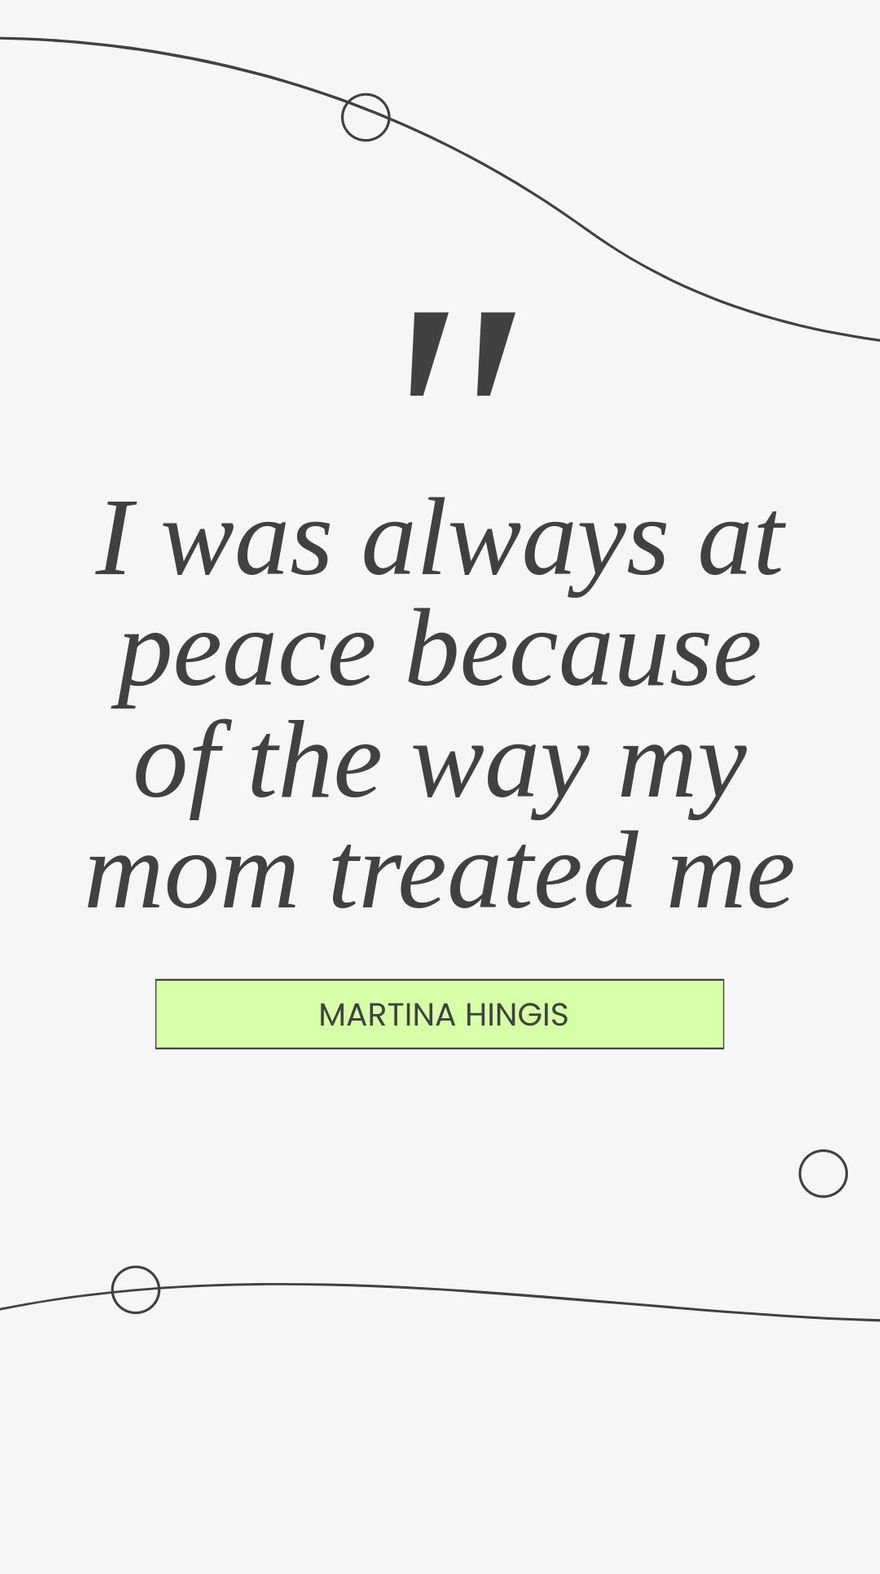 Free Martina Hingis - I was always at peace because of the way my mom treated me. 